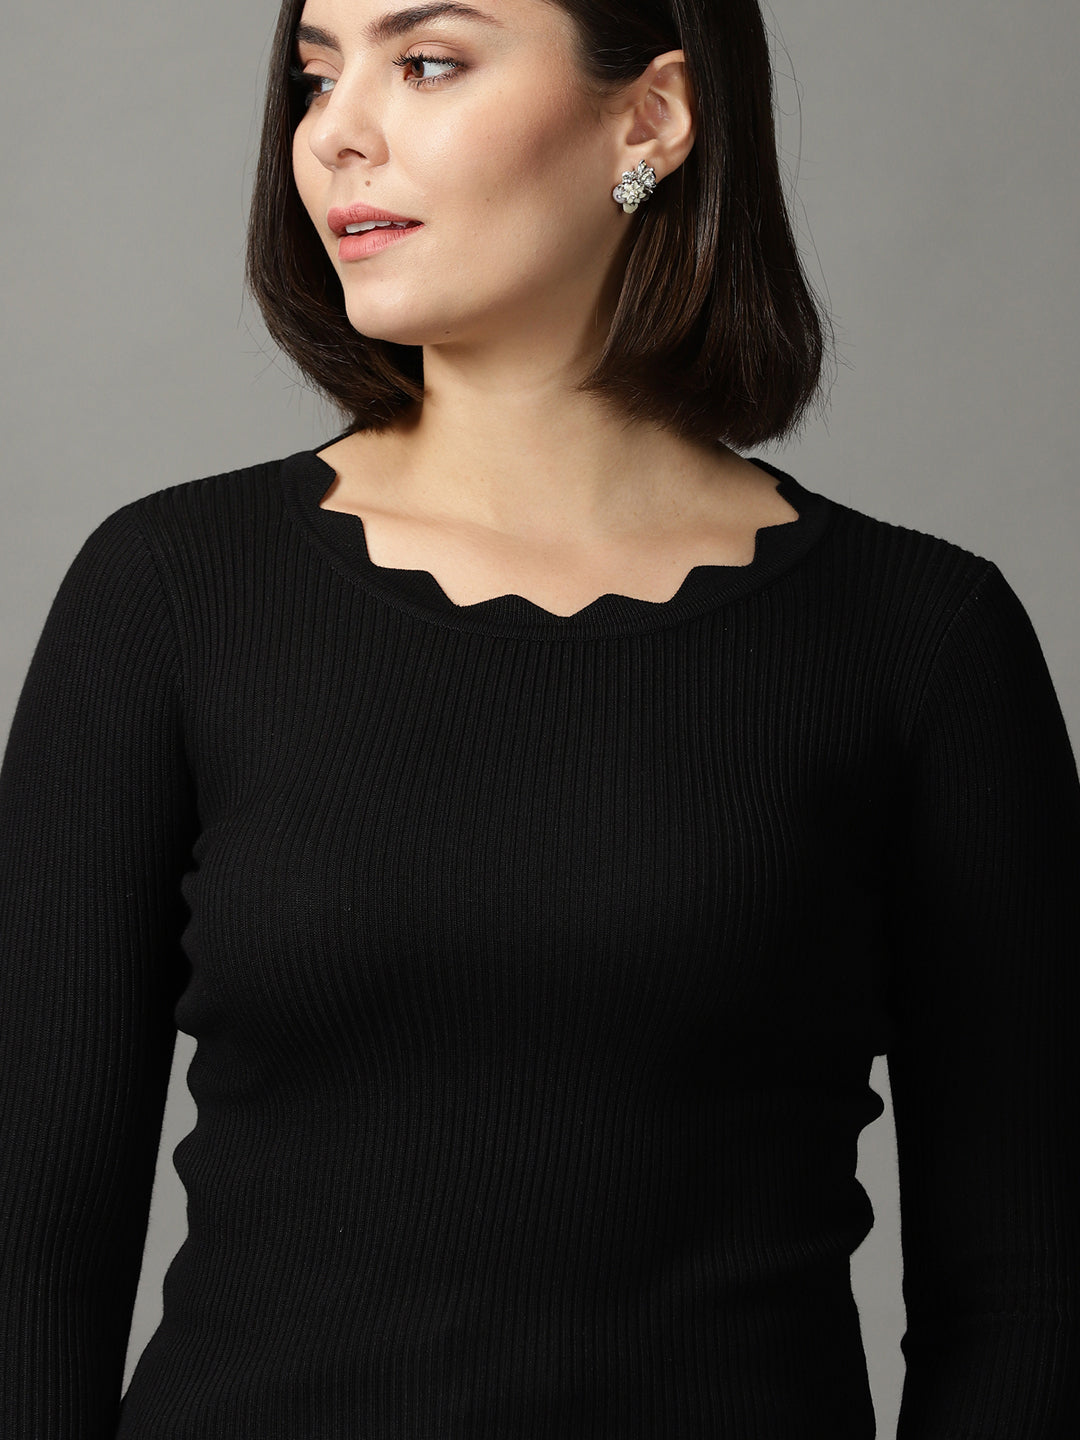 Women's Black Solid Fitted Top